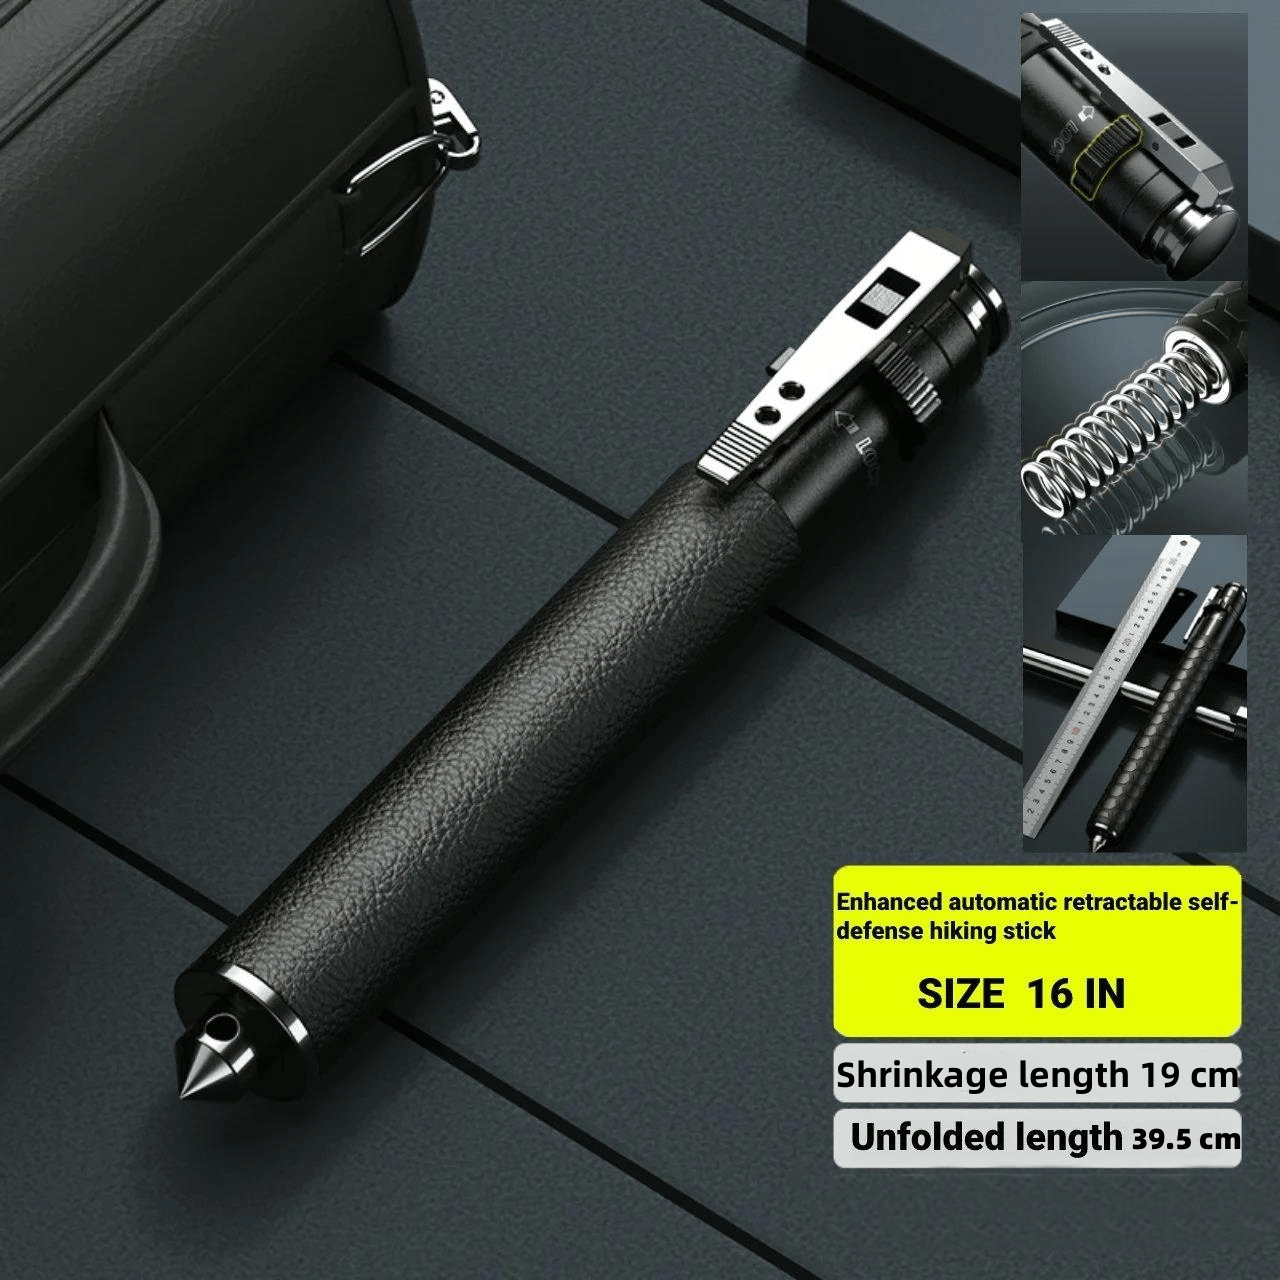 🔥LAST DAY 49% OFF-Enhanced Automatic Retractable Self-Defense Hiking Stick